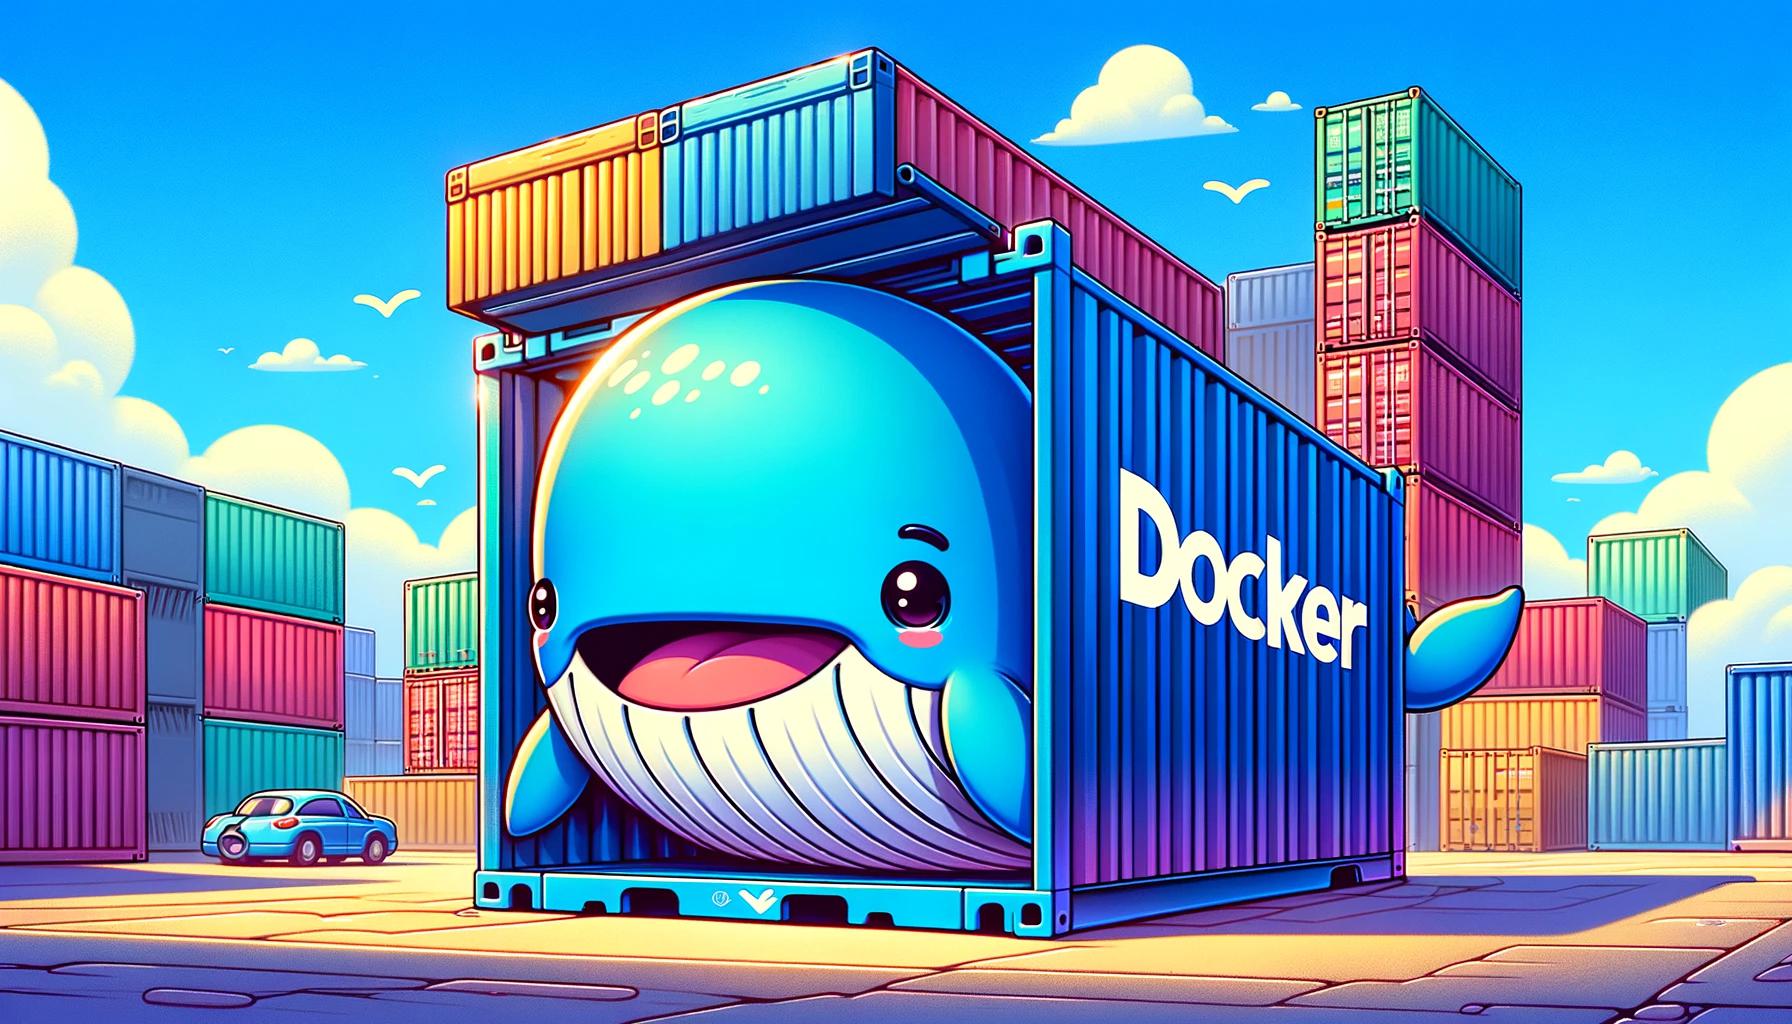 Cartoon whale in a shipping container labeled ‘Docker’